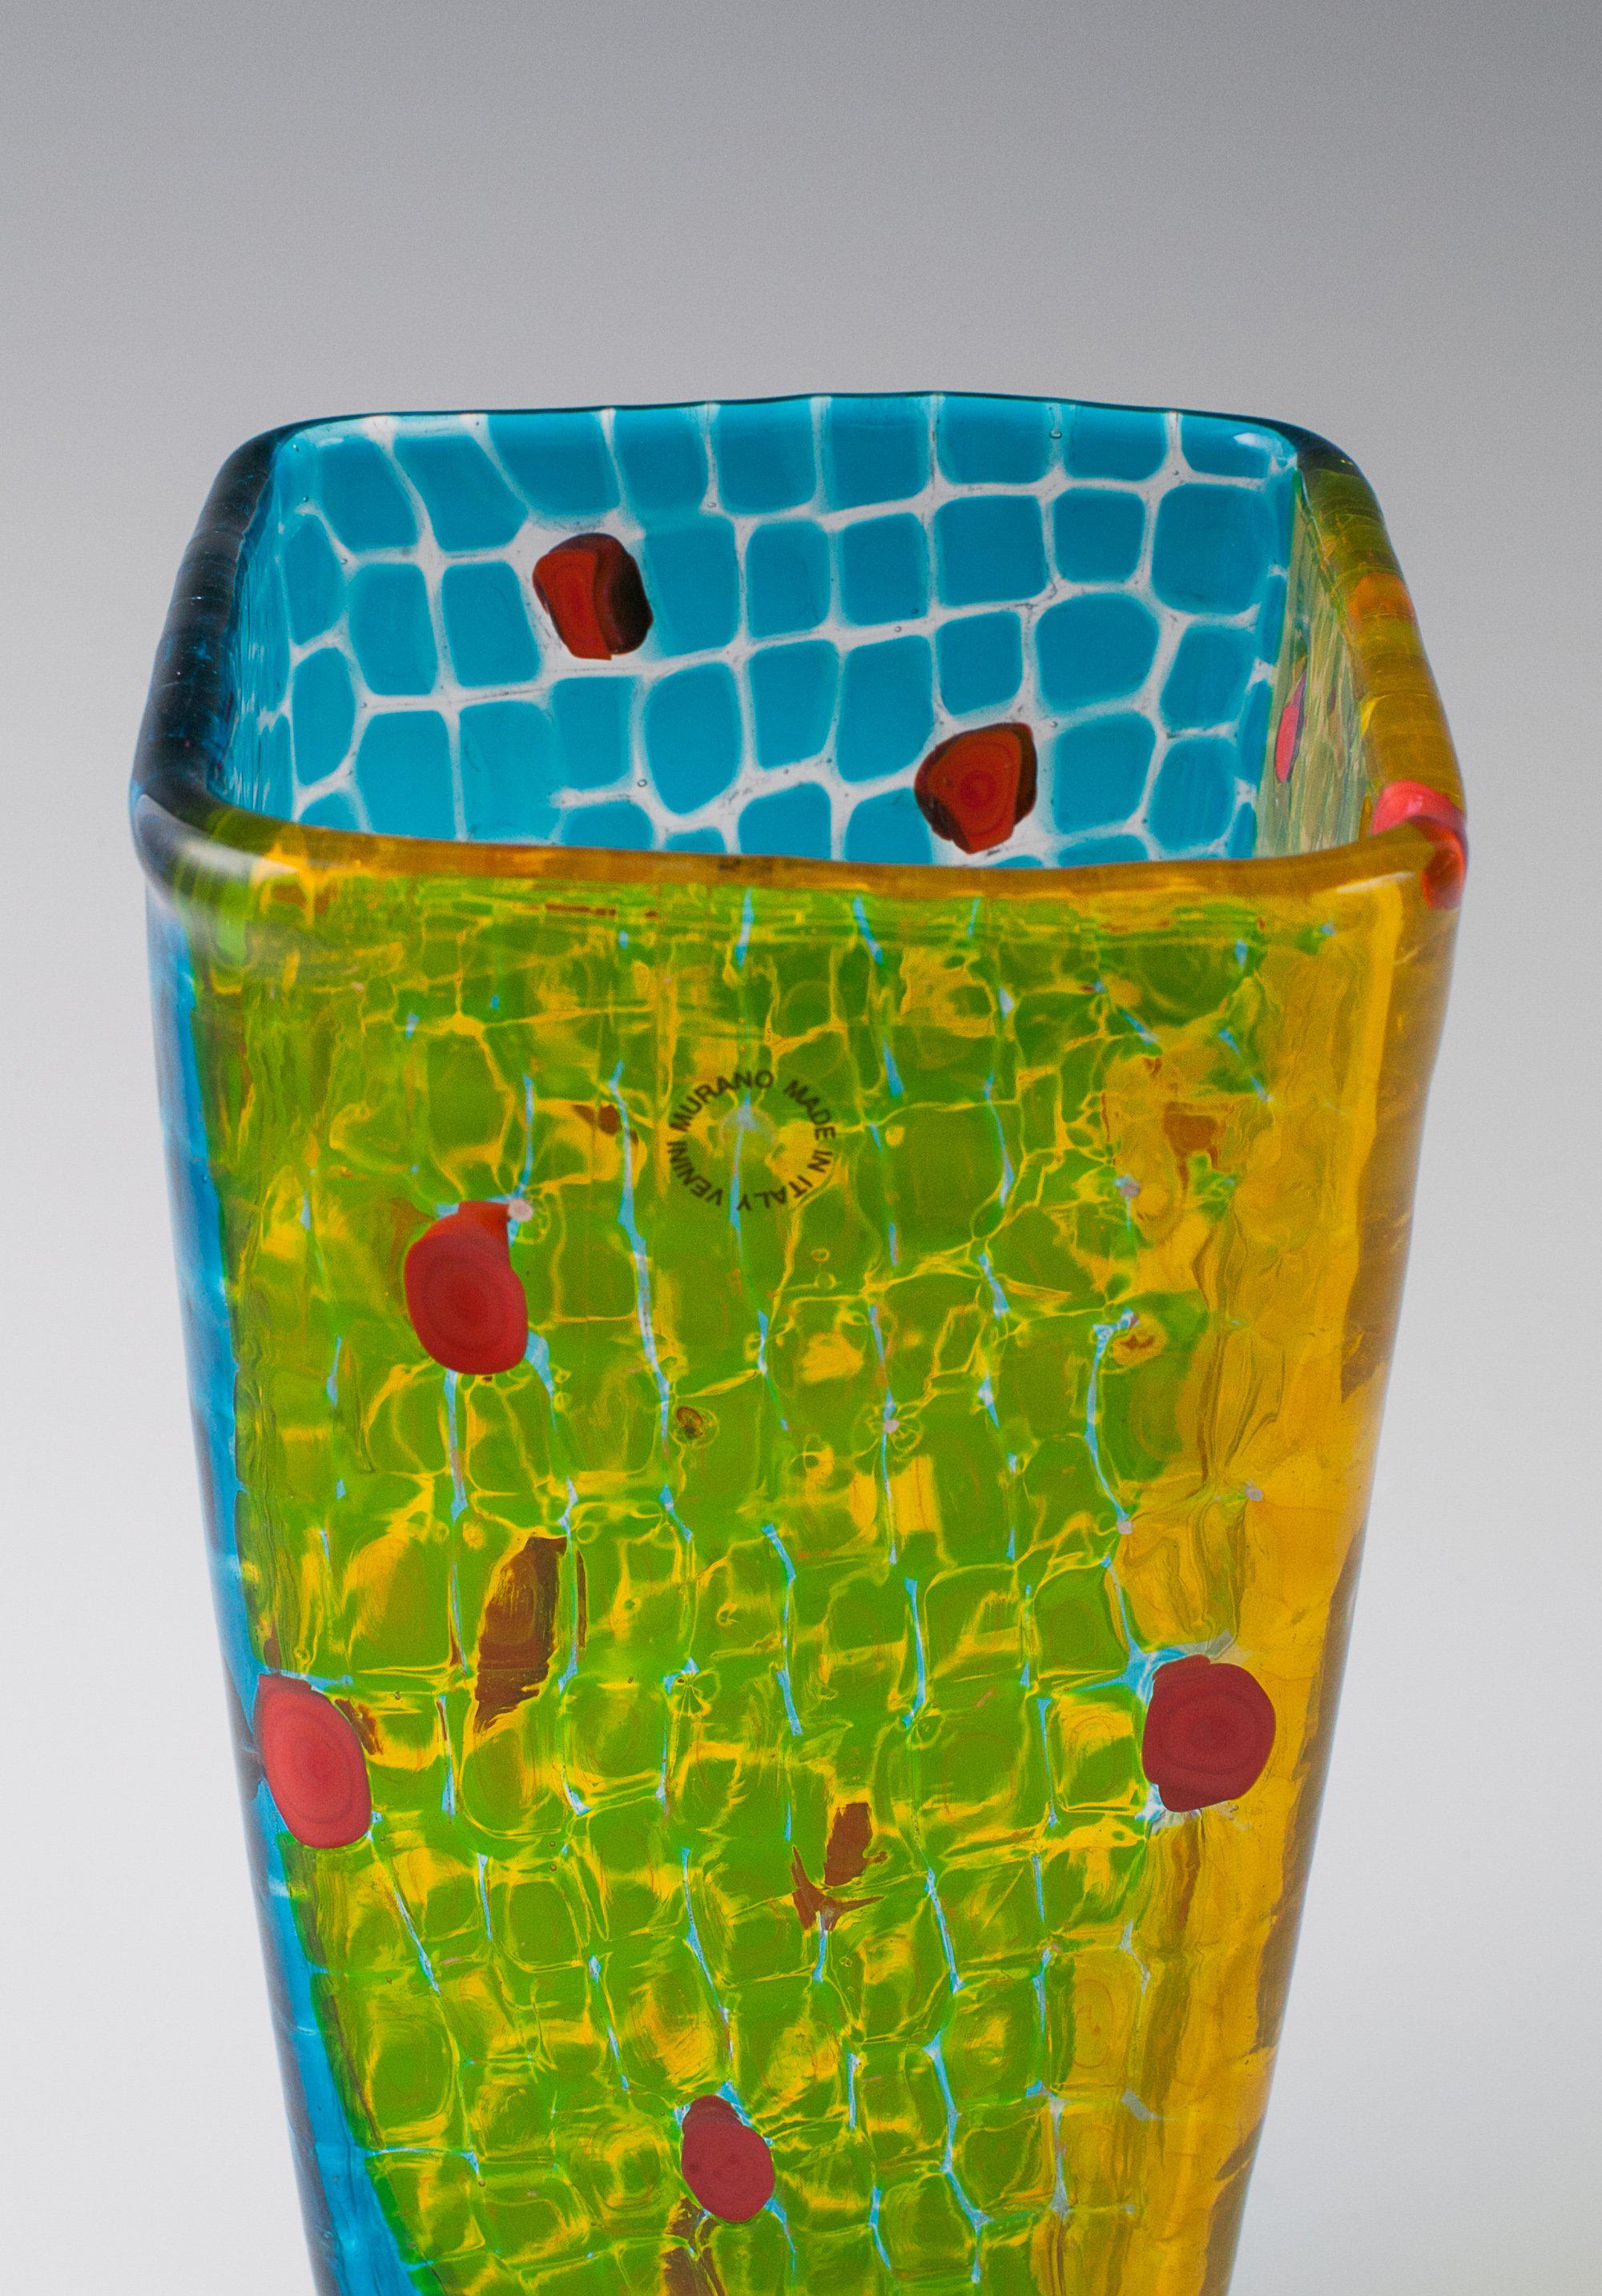 Gianni Versace vase, for Venini, 1998.
1st production.
Large square form in blue and yellow transparent glass with opaque red inclusions, engraved signature “venini Gianni Versace 1998/113”.
Original label Venini Murano, made in Italy.
Includes